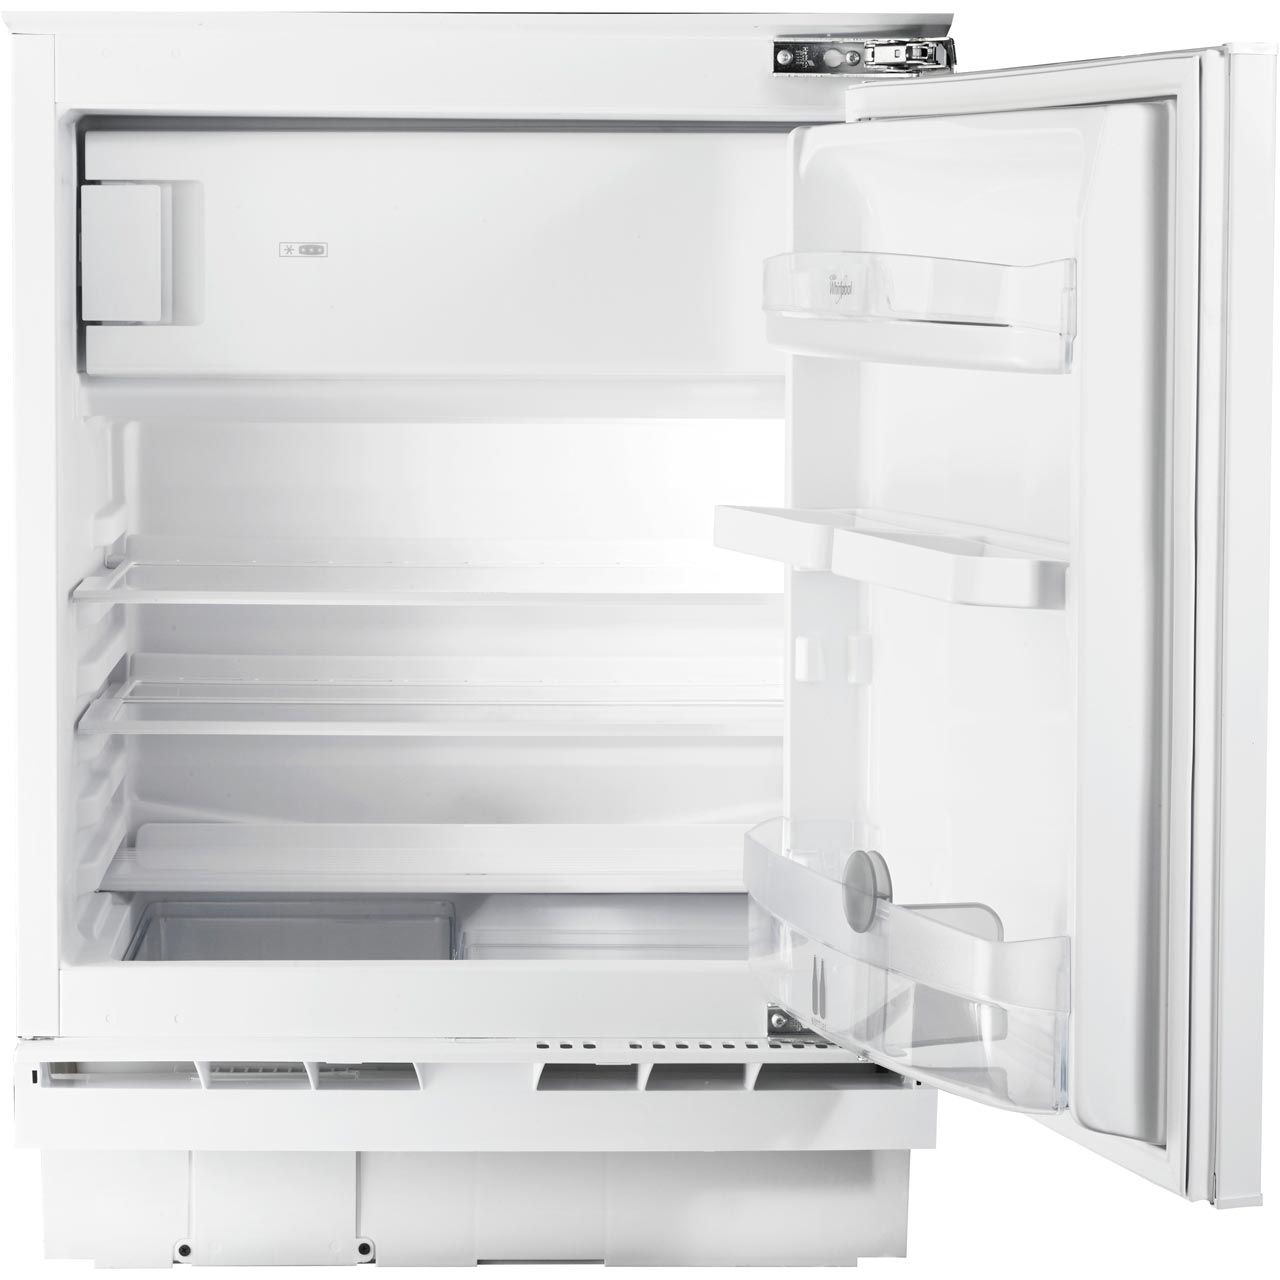 Whirlpool ARG108/18A+/RE.1 Integrated Under Counter Fridge Review